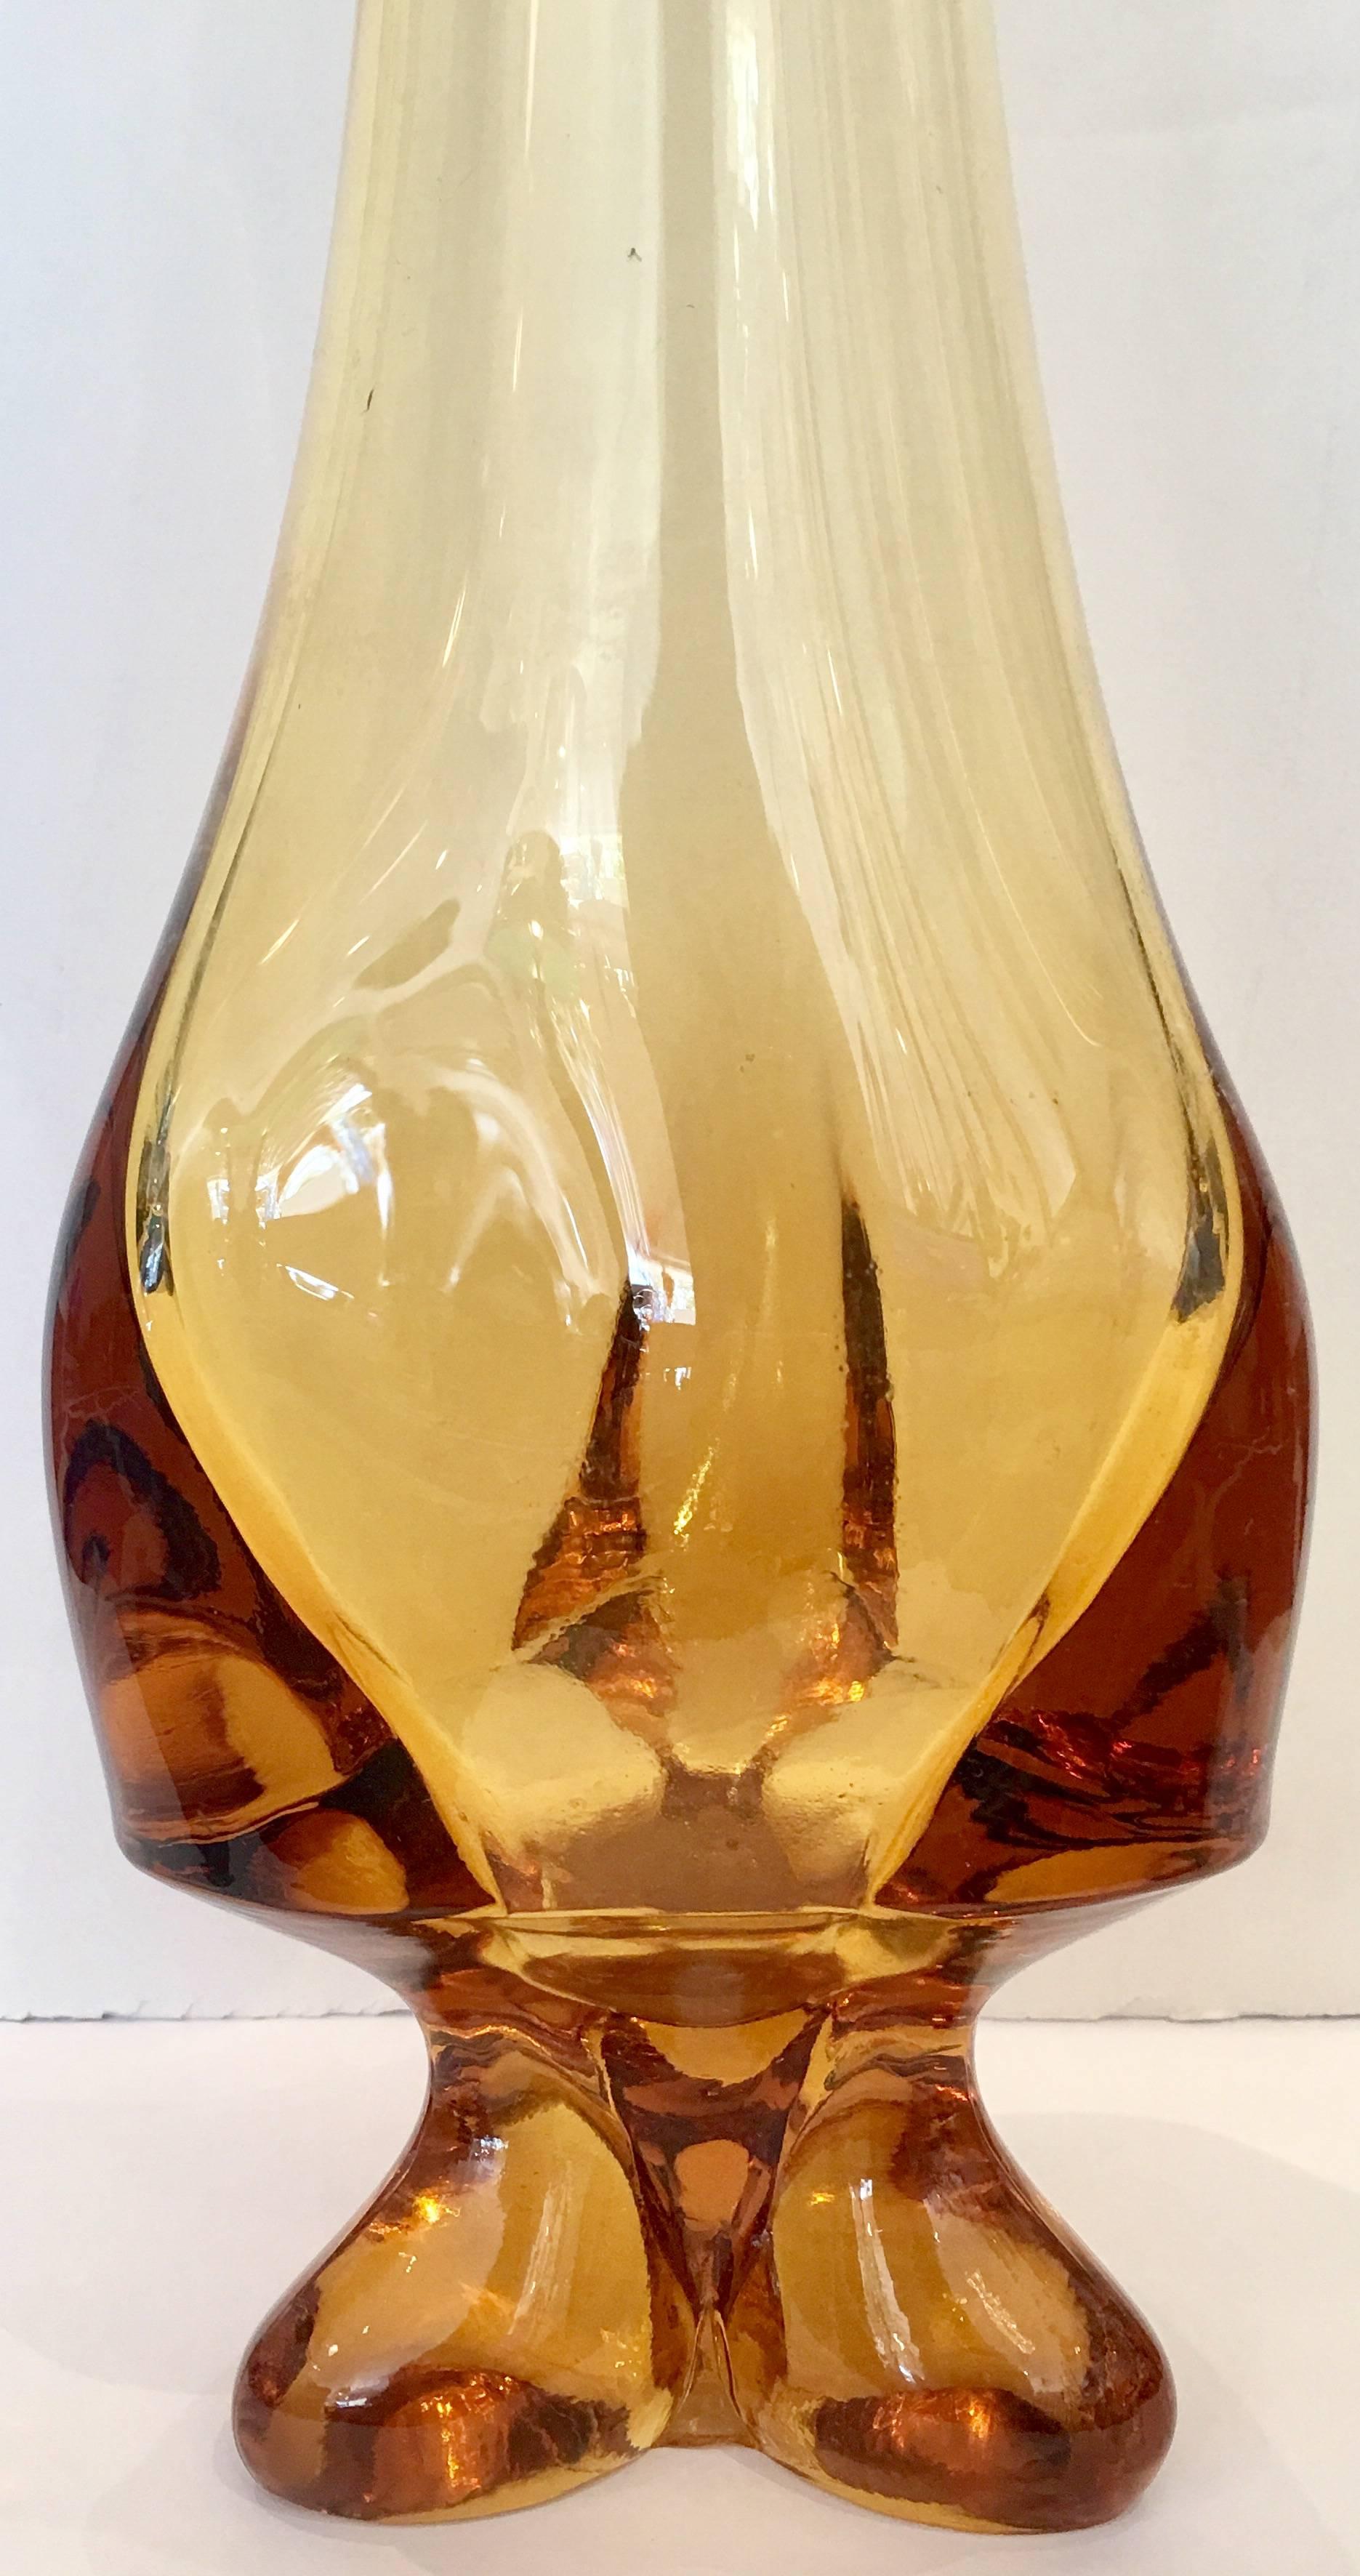 A rare three point footed amber stretch art glass vase by Viking Glass company. The underside shows the Viking pontil mark.